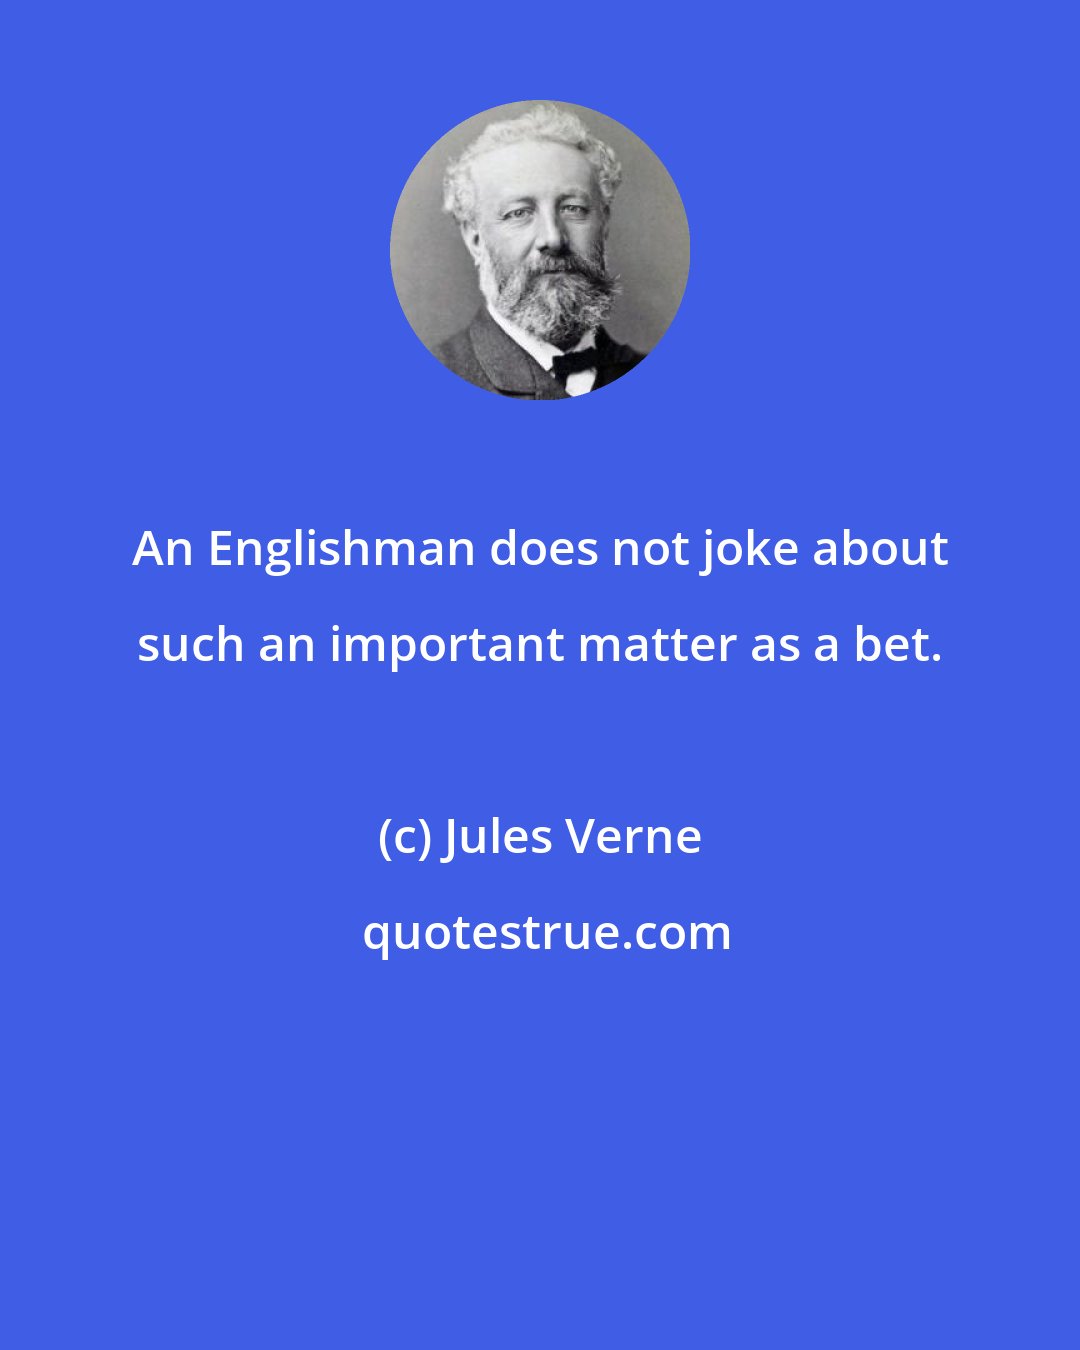 Jules Verne: An Englishman does not joke about such an important matter as a bet.